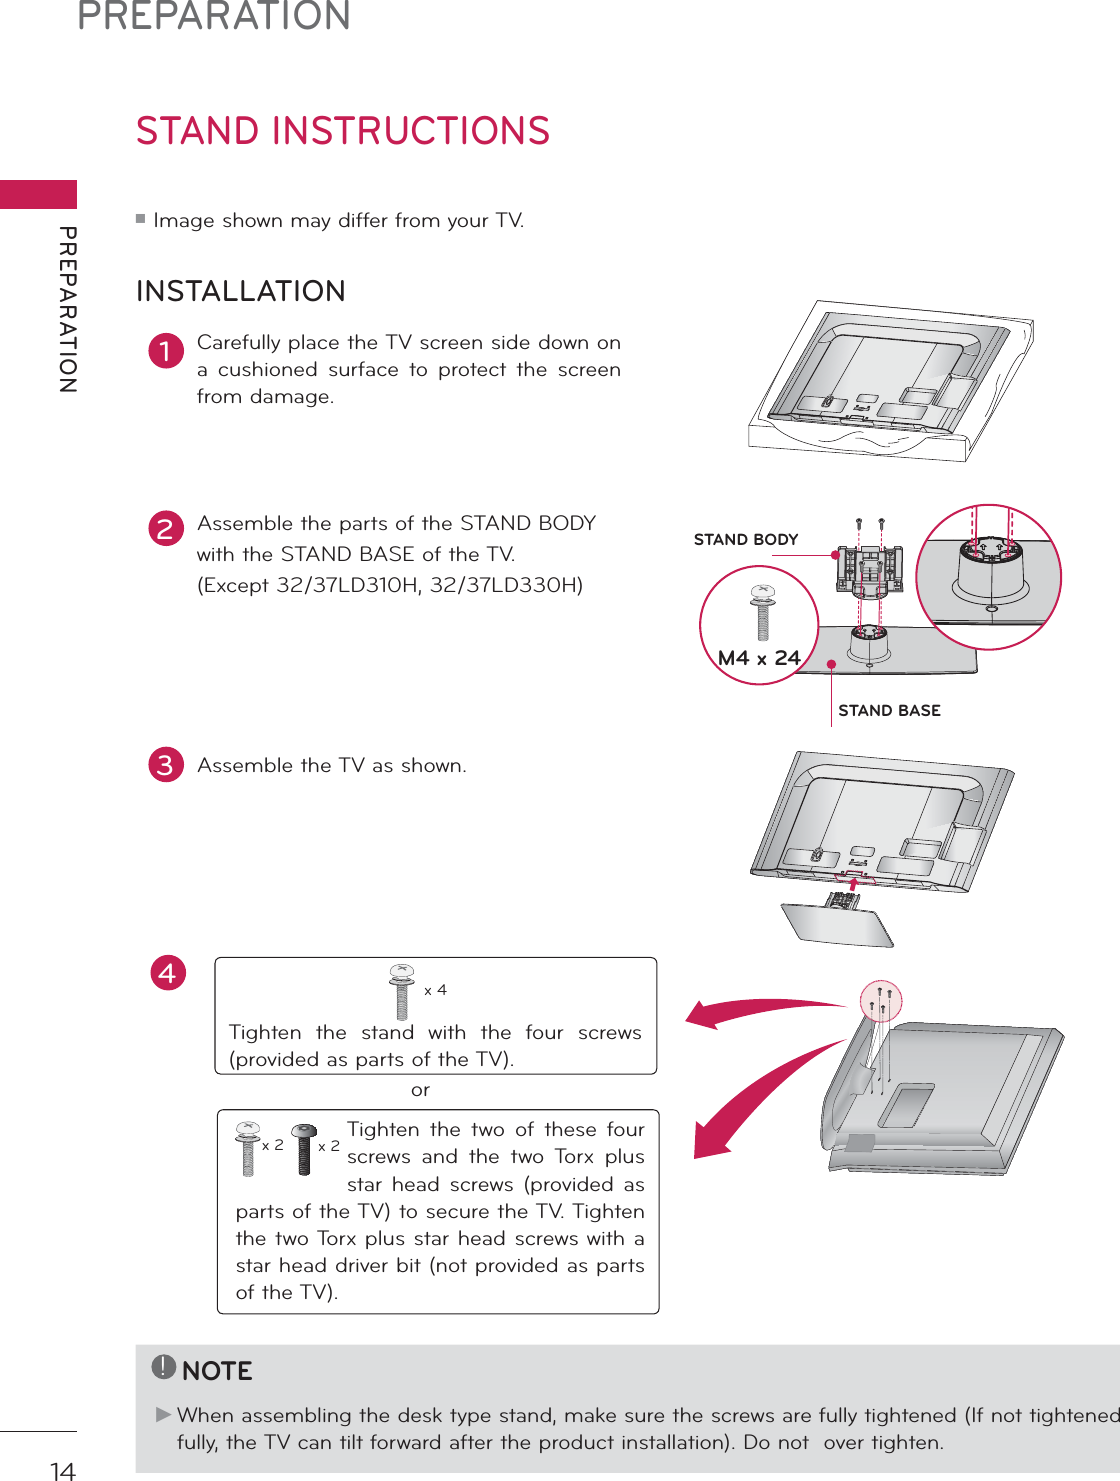 PREPARATIONPREPARATION14STAND INSTRUCTIONS ᯫ Image shown may differ from your TV.1Carefully place the TV screen side down on a cushioned surface to protect the screen from damage.2Assemble the parts of the STAND BODYwith the STAND BASE of the TV. (Except 32/37LD310H, 32/37LD330H)INSTALLATION!NOTEŹ When assembling the desk type stand, make sure the screws are fully tightened (If not tightened fully, the TV can tilt forward after the product installation). Do not  over tighten.3Assemble the TV as shown.Tighten the stand with the four screws (provided as parts of the TV).x 4orTighten the two of these four screws and the two Torx plus star head screws (provided as parts of the TV) to secure the TV. Tighten the two Torx plus star head screws with a star head driver bit (not provided as parts of the TV).x 2 x 2M4 x 24STAND BASESTAND BODYAC  INCABLE  MANAGEMENTAC  INCABLE  MANAGEMENT4